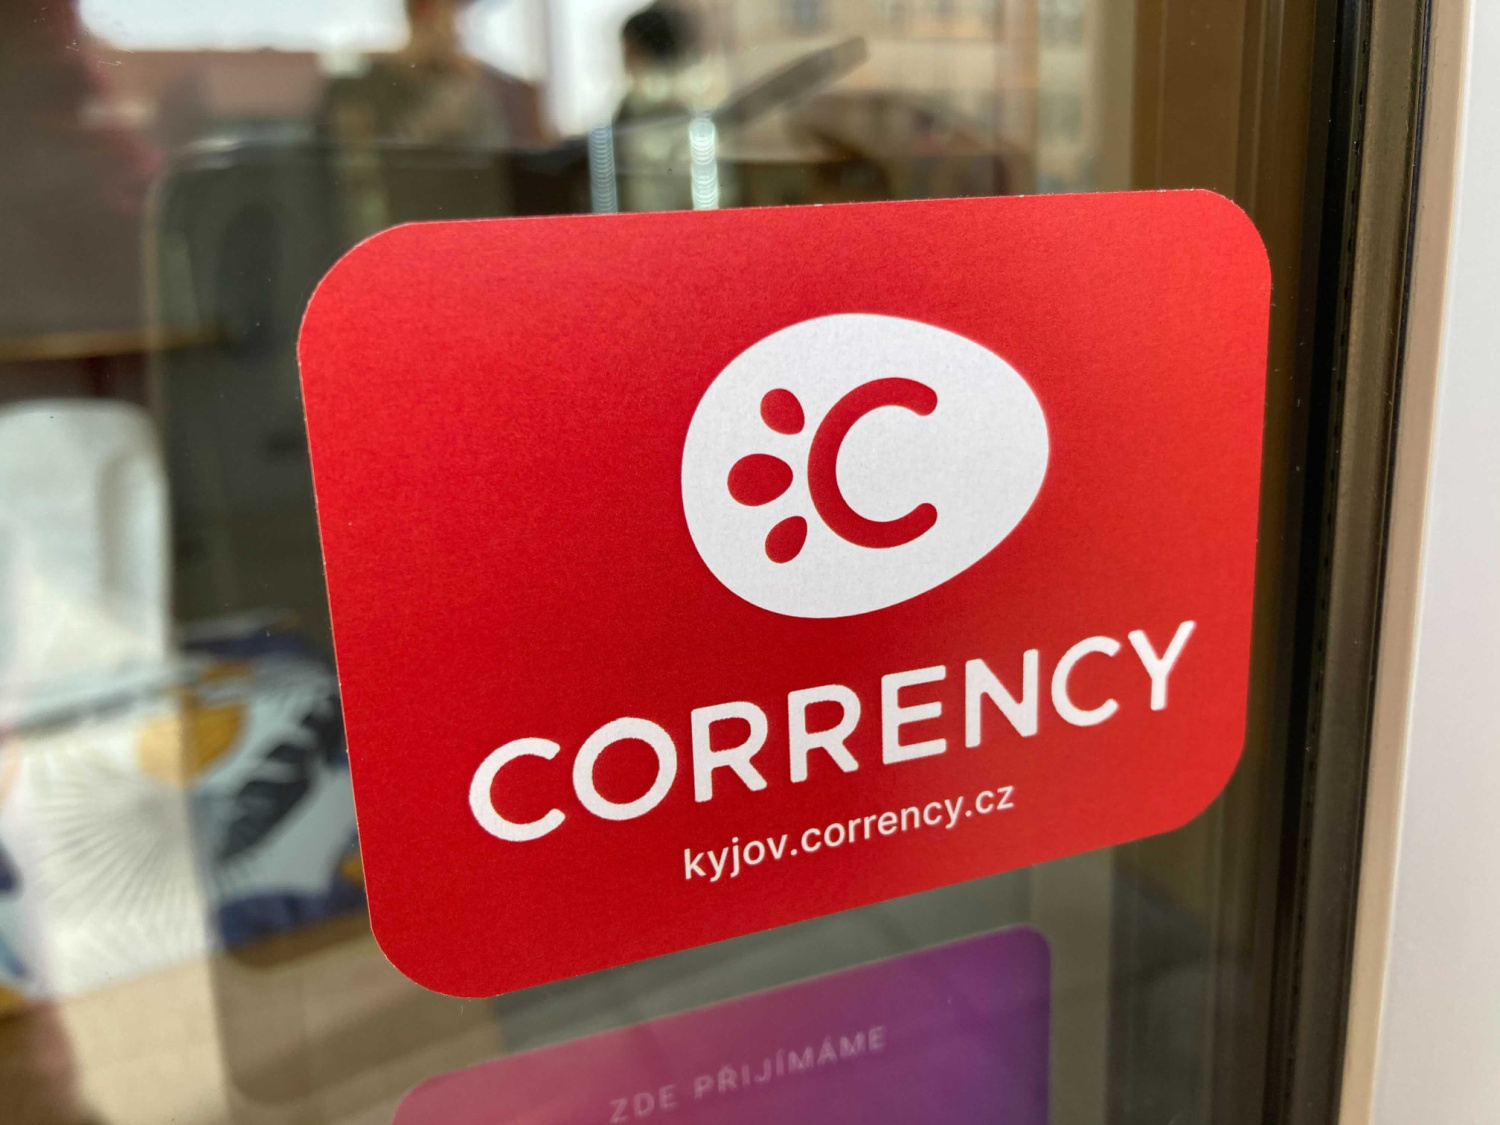 Corrency in Kyjov has been extended